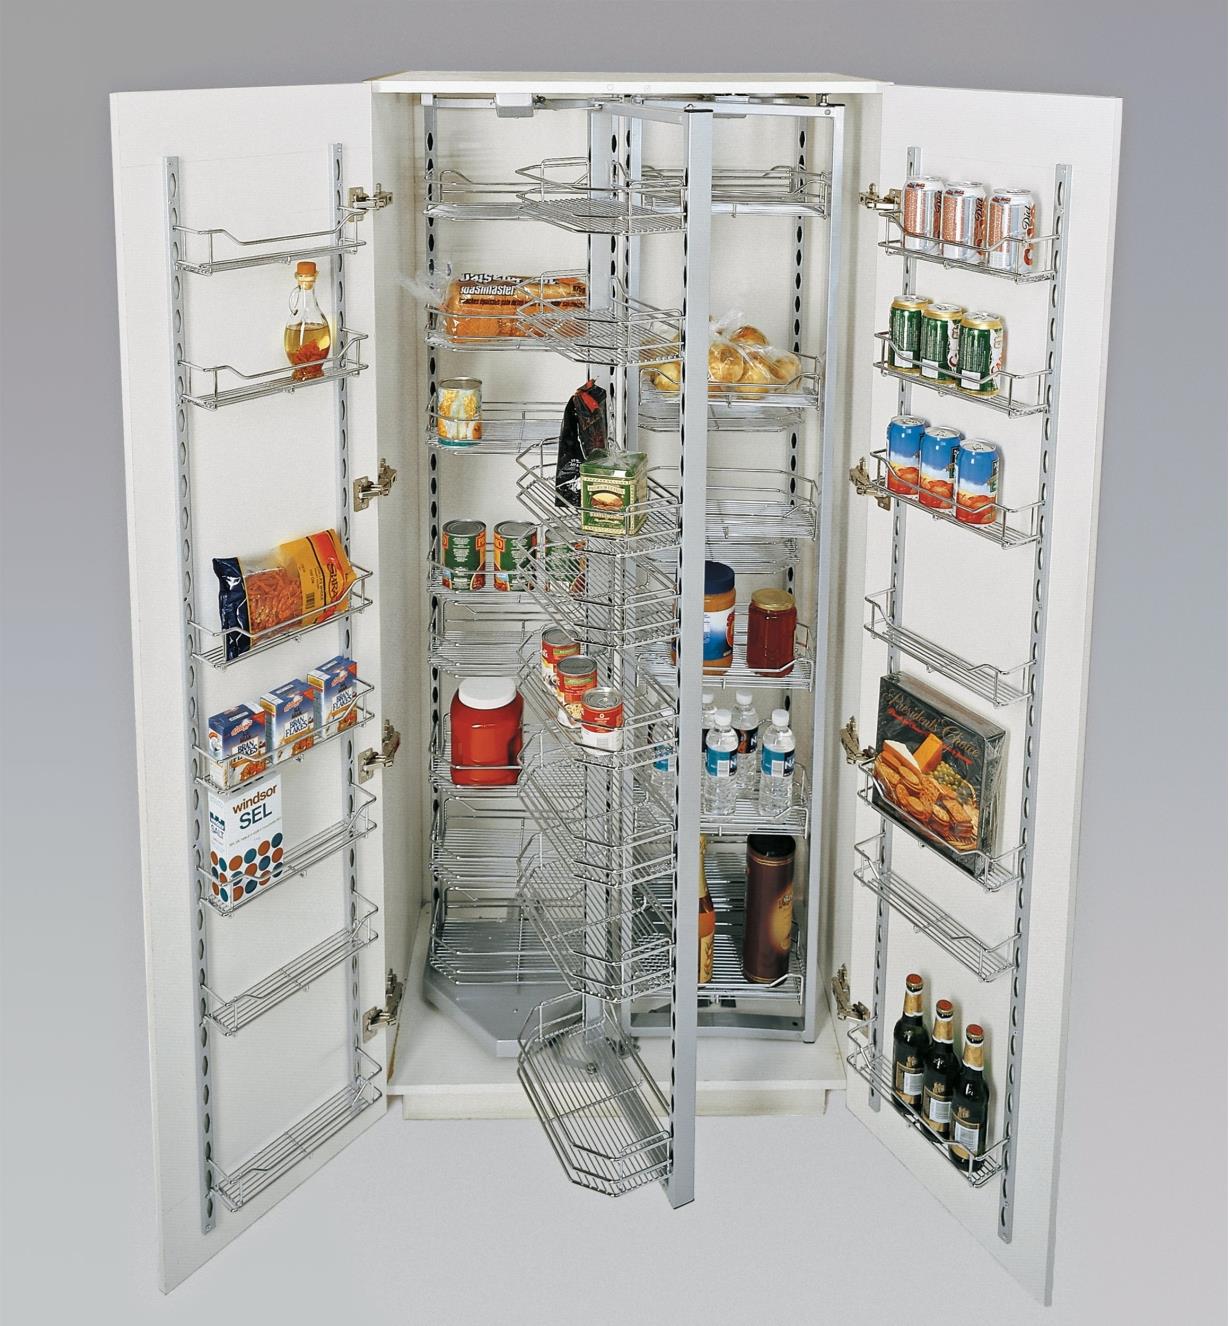 Installed Kitchen Pantry Hardware holding various food items